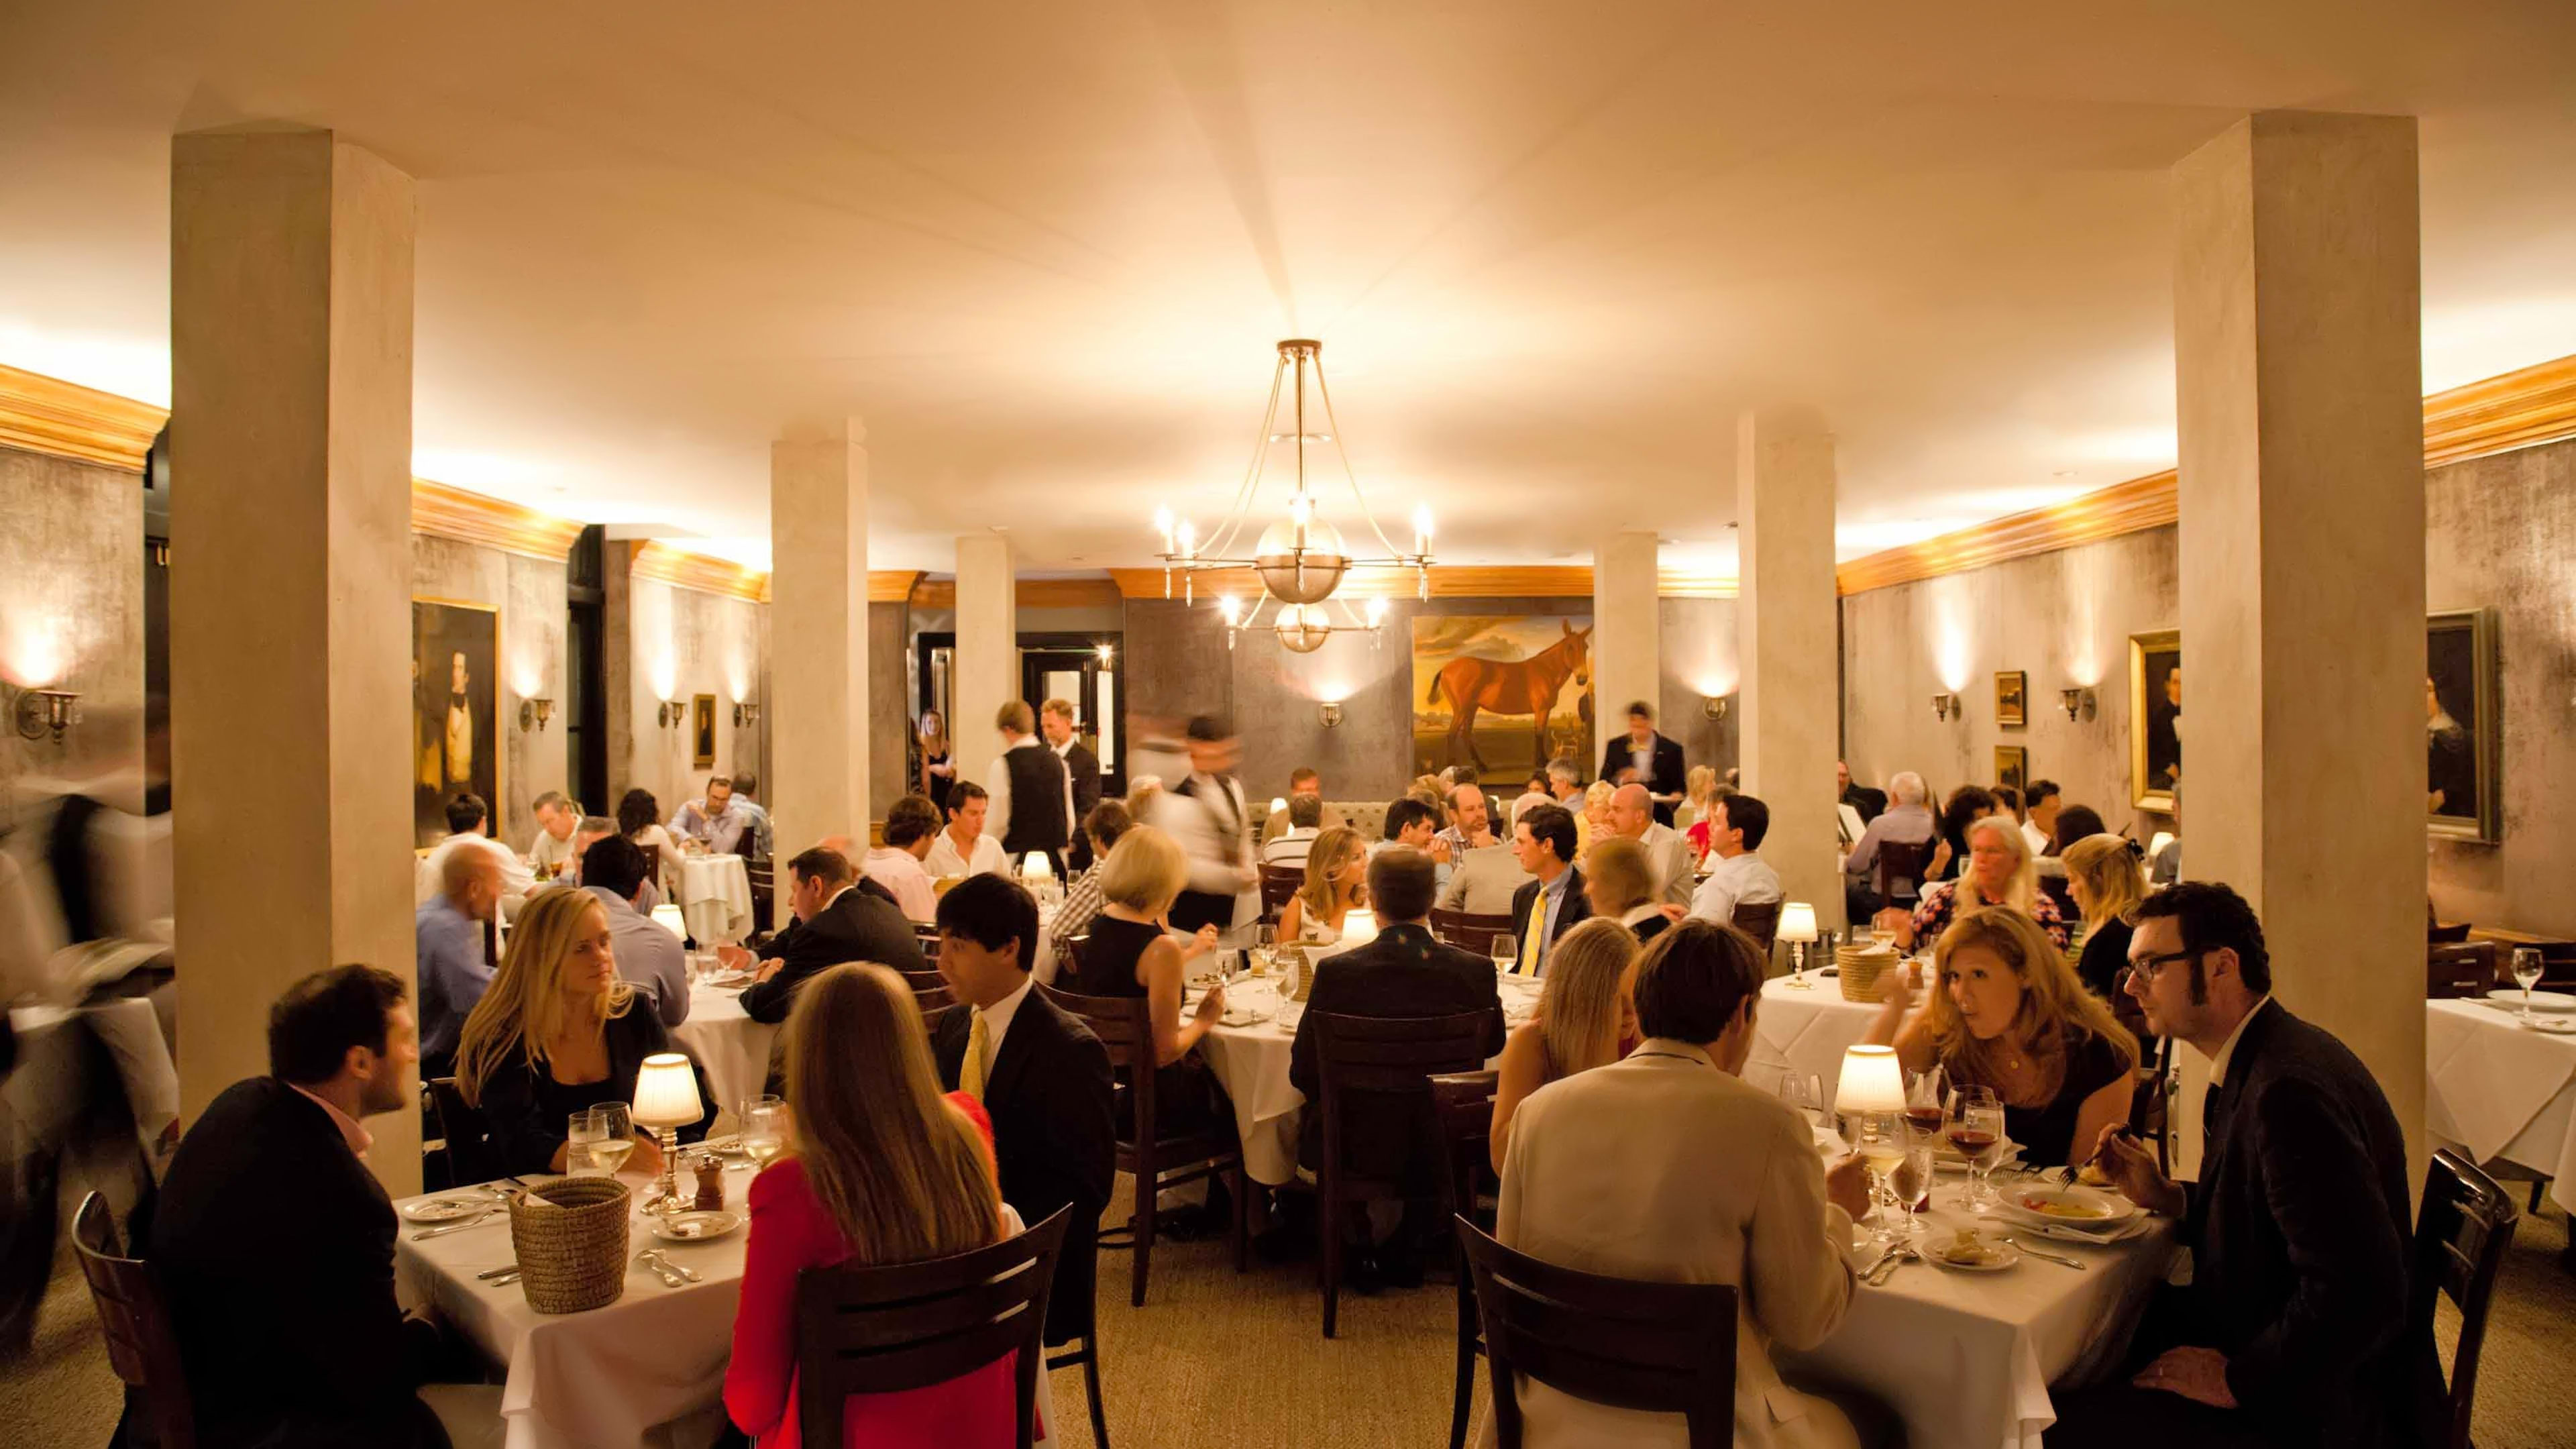 A full dining room with tables of people dressed nicely for dinner at Peninsula Grill in Charleston.